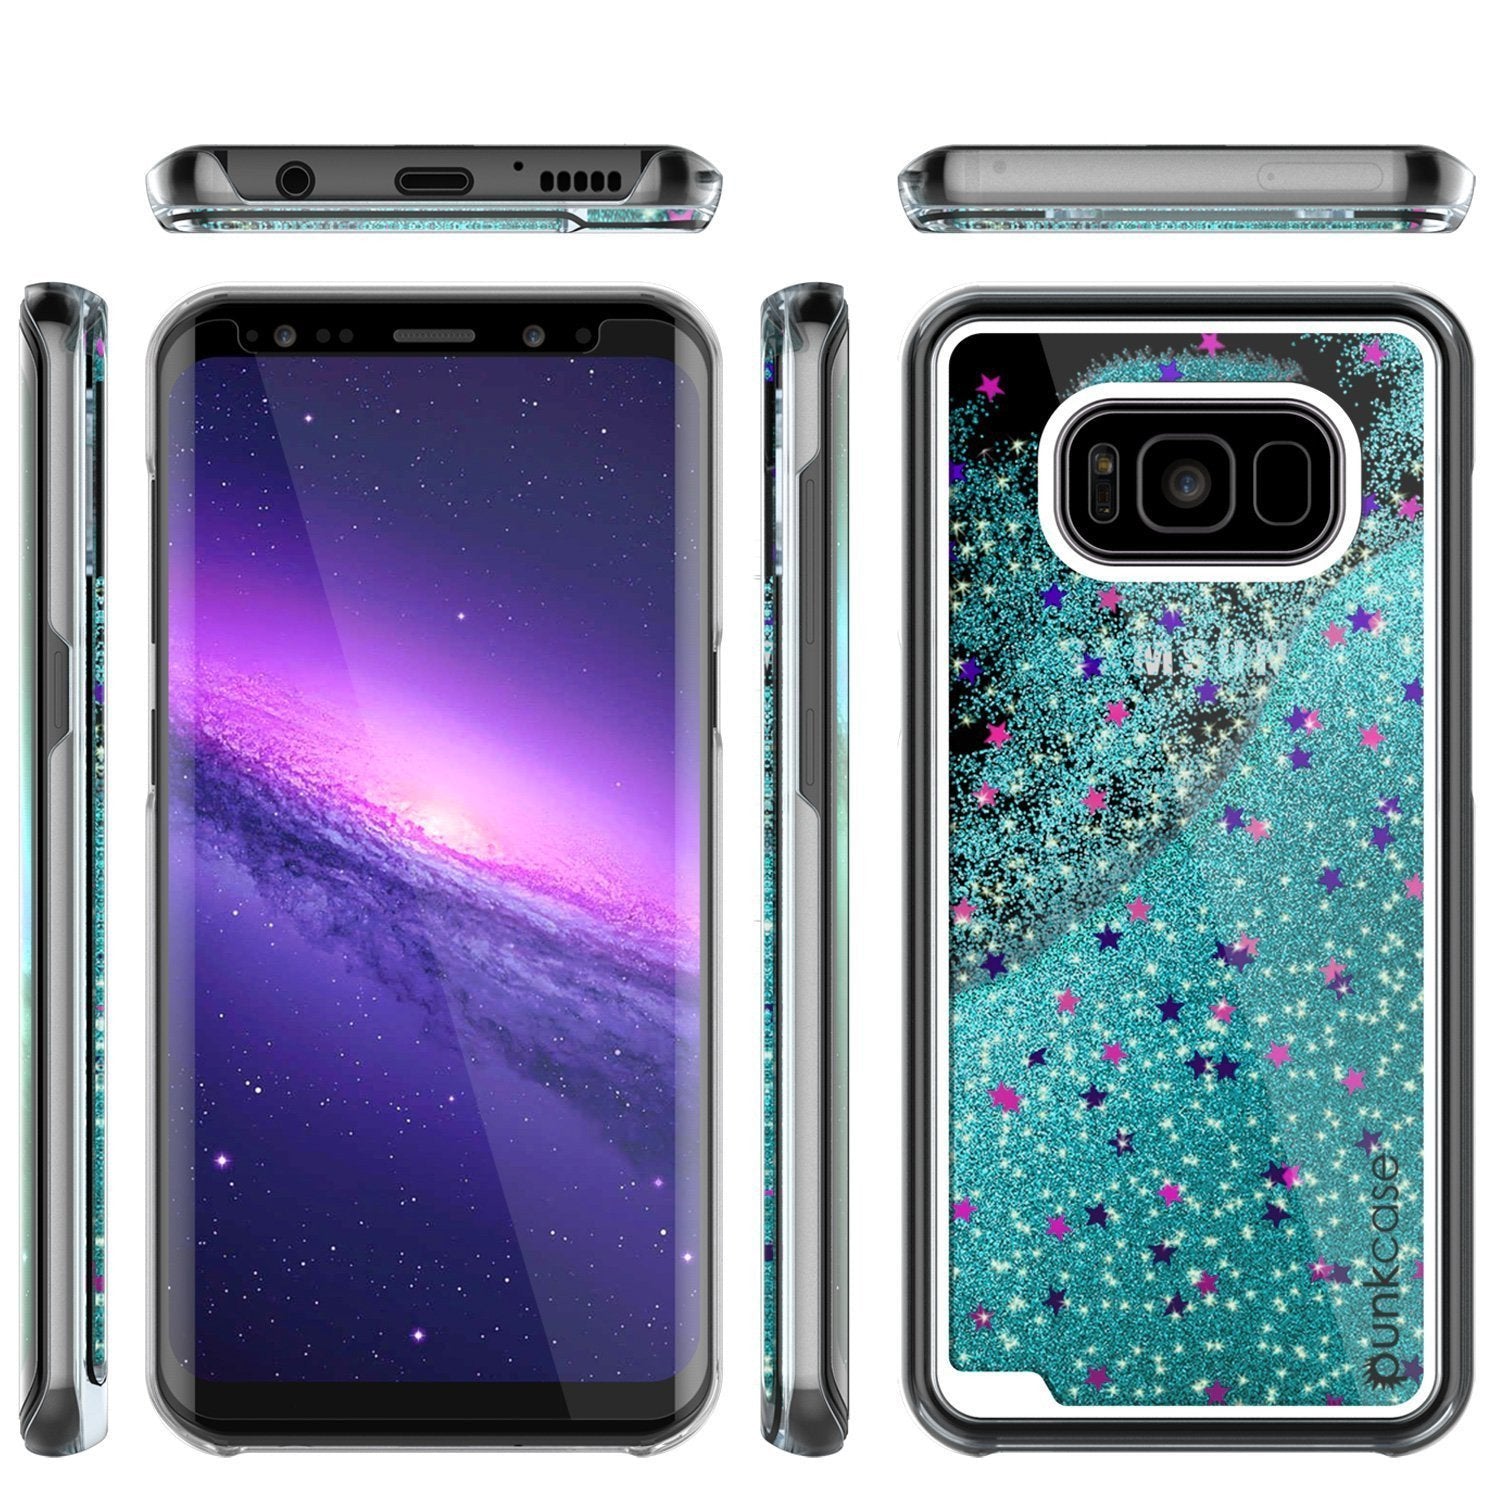 Galaxy S8 Case, Punkcase® Lucid Teal Series | Card Slot | Shield Screen Protector | Ultra Fit